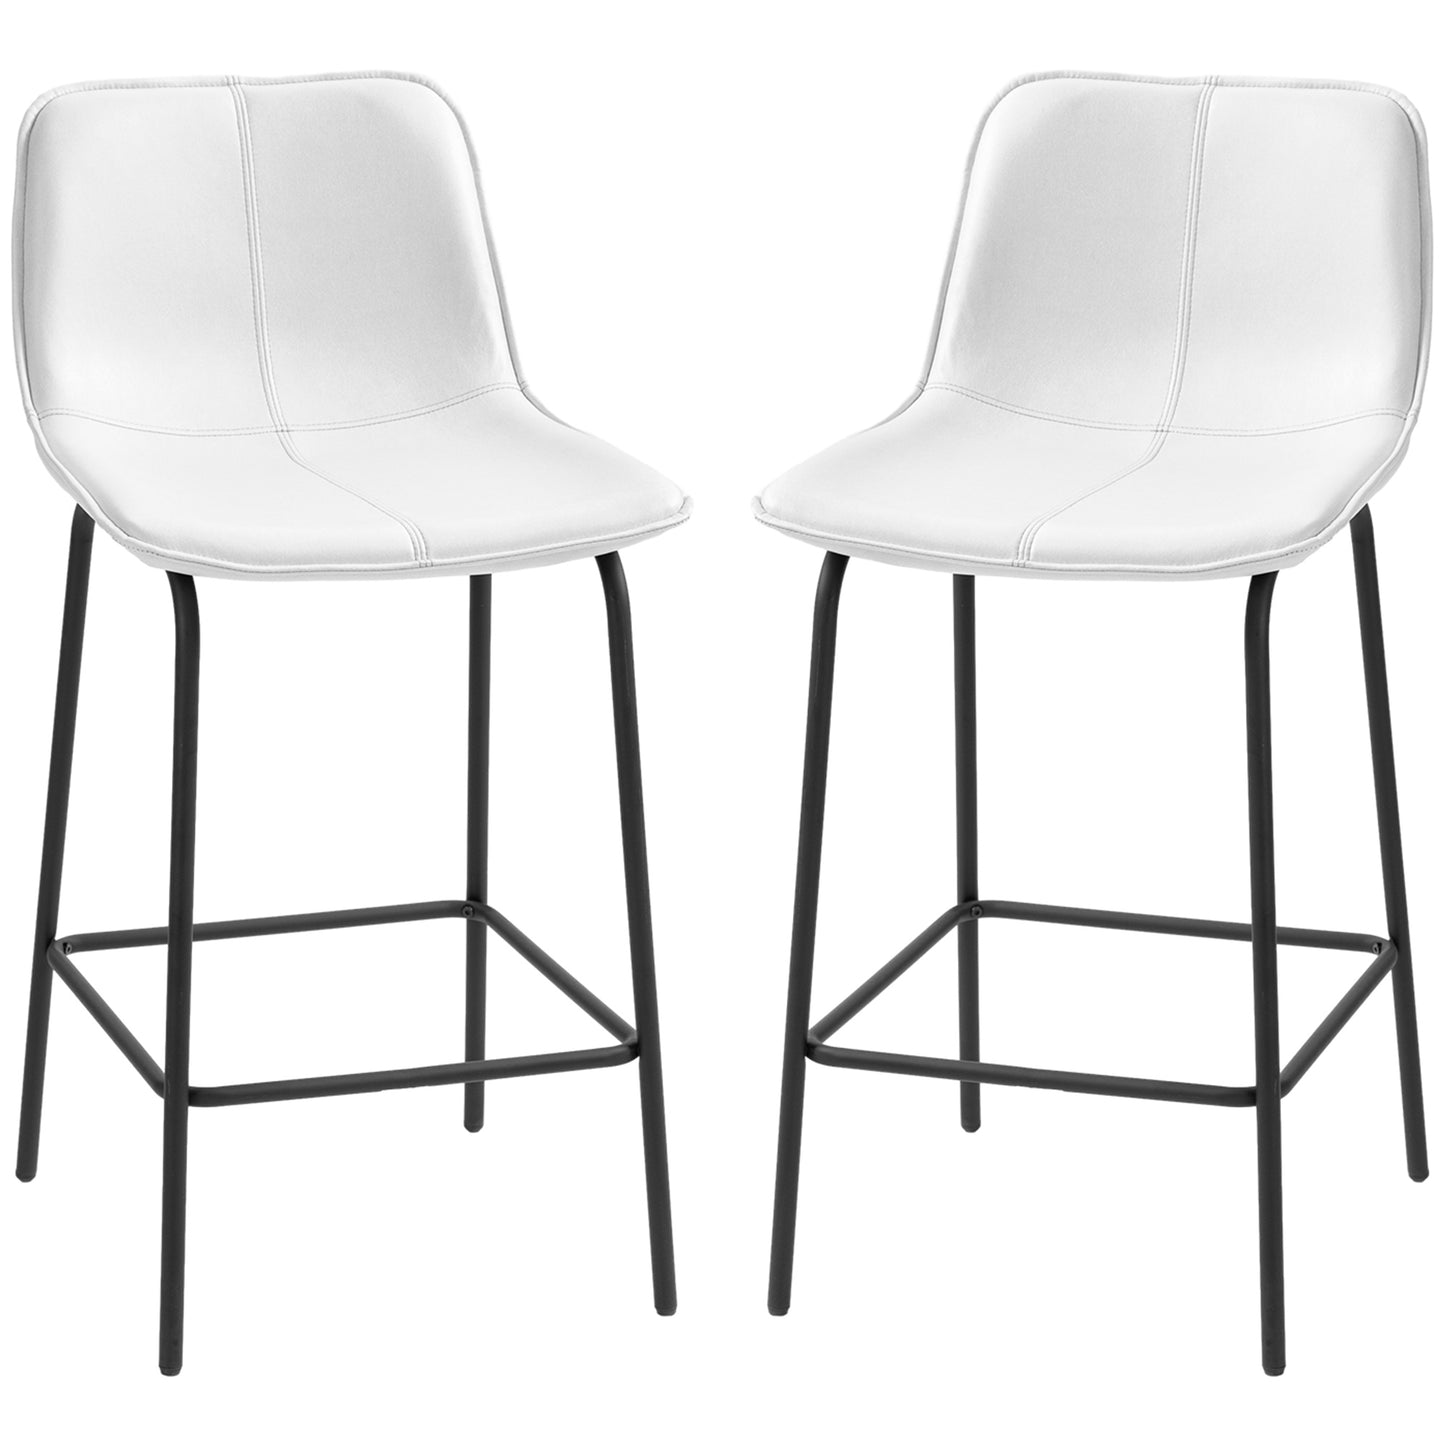 SET OF 2 Upholstered Bar Stools Counter Height with Steel Legs in White